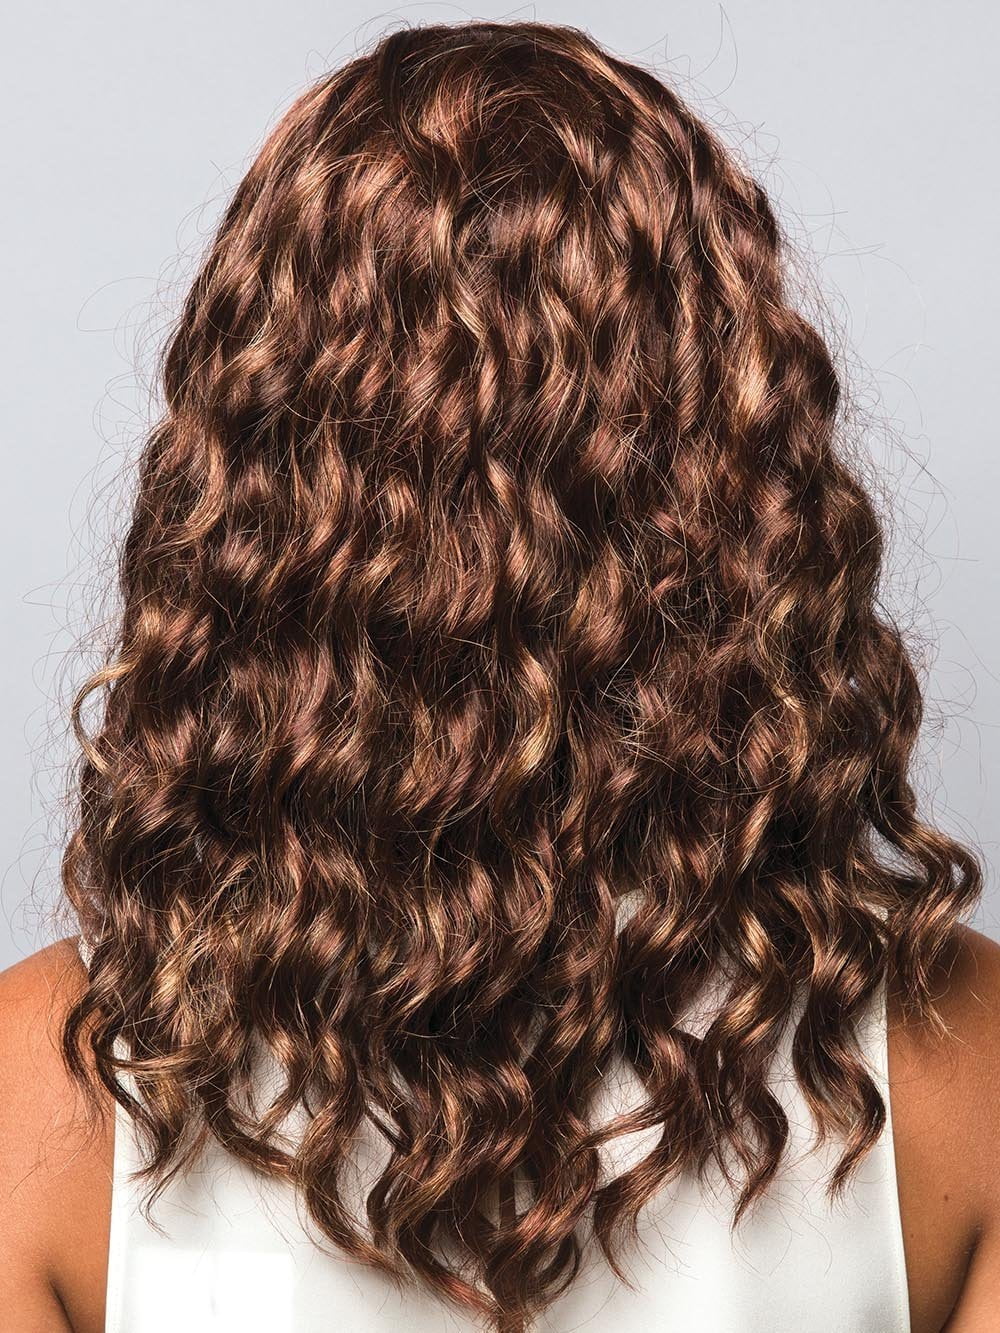 Effortless curls for your everyday look